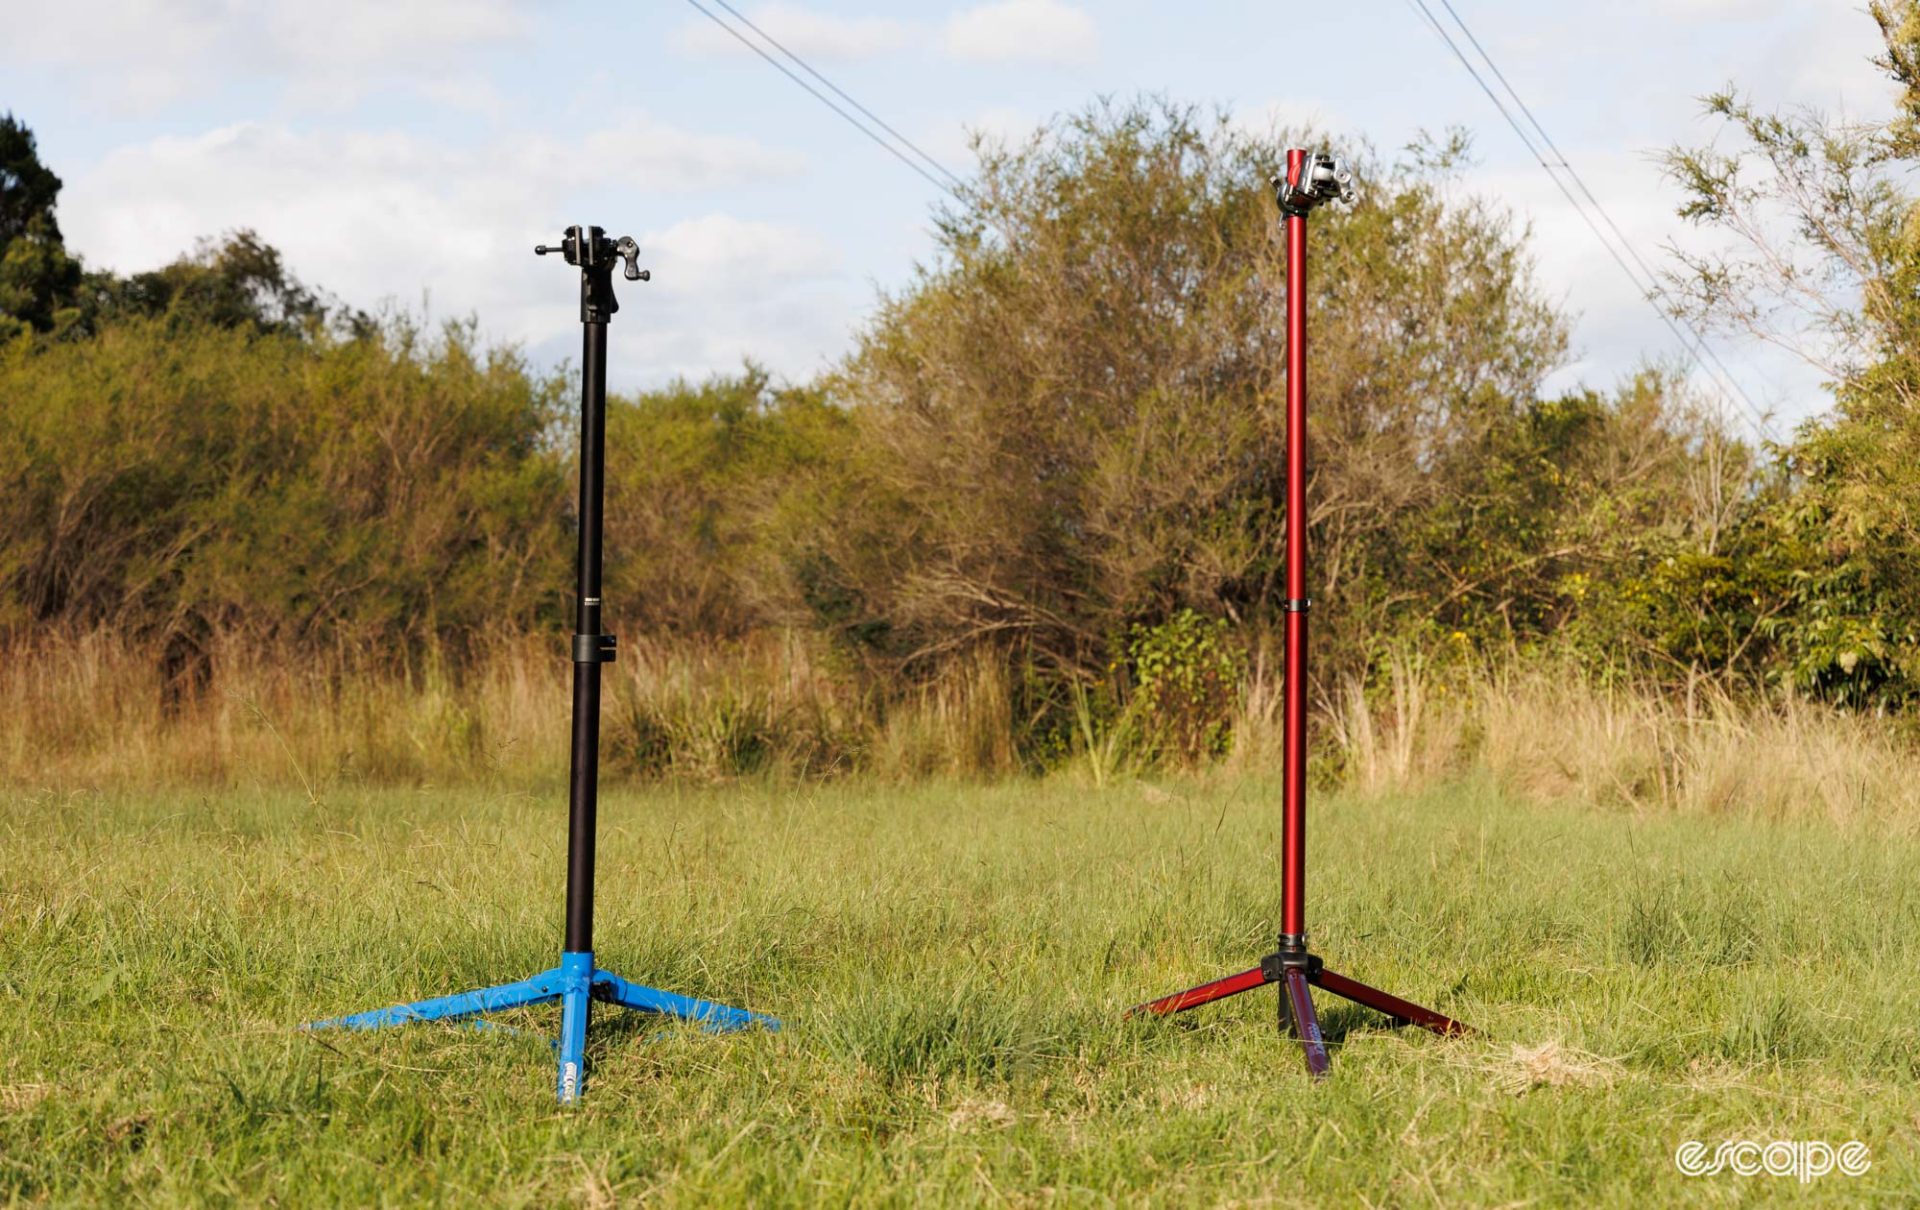 Park Tool PRS-26 and Feedback Sports Pro Mechanic repair stands in a grass field.  